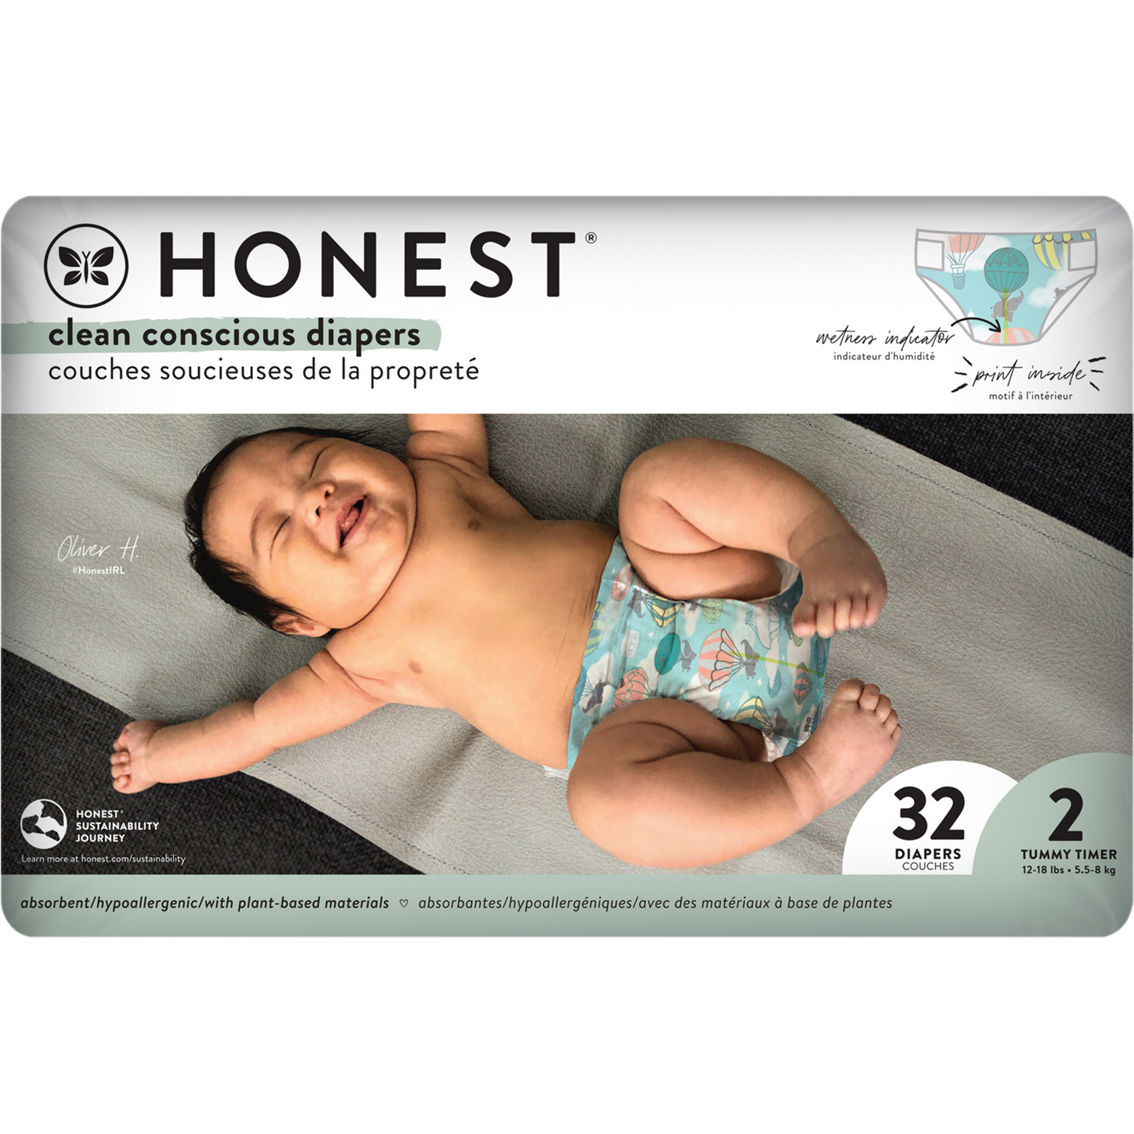 The Honest Company Pandas Clean Conscious Diapers, Size 2 (12-18 lb.), 32 ct. - Image 2 of 2